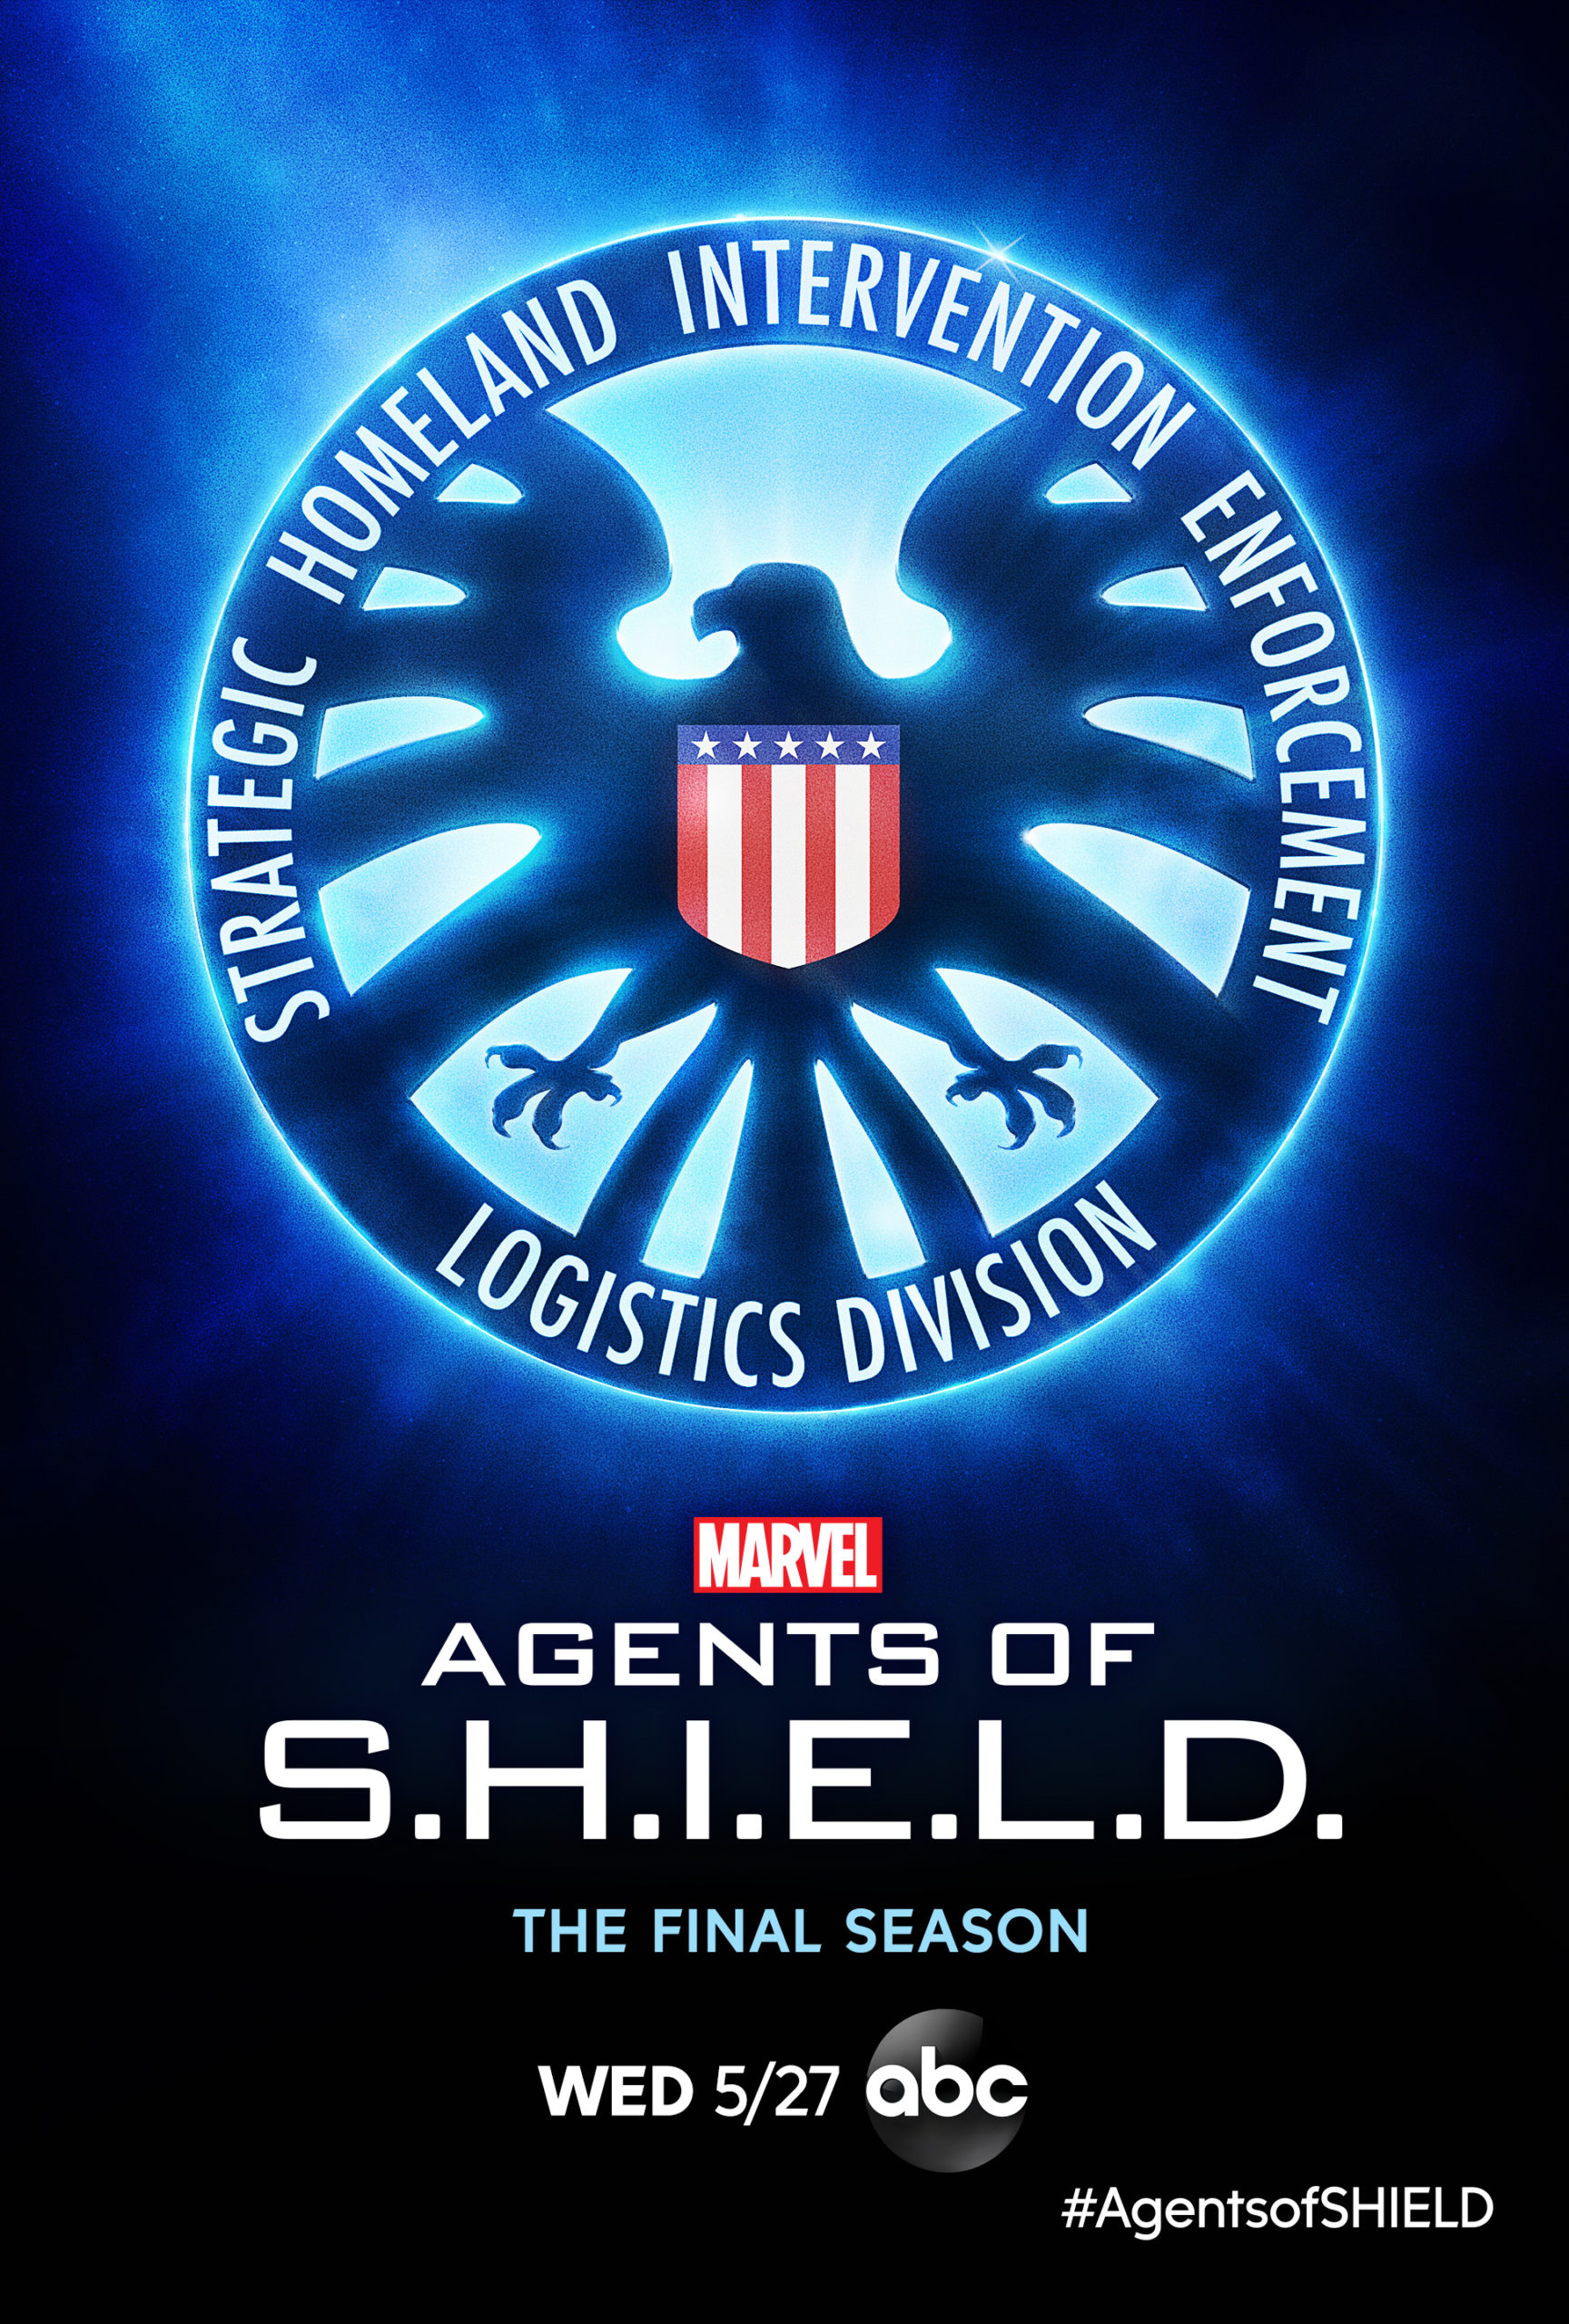 SHIELD’s Final Mission Is Coming